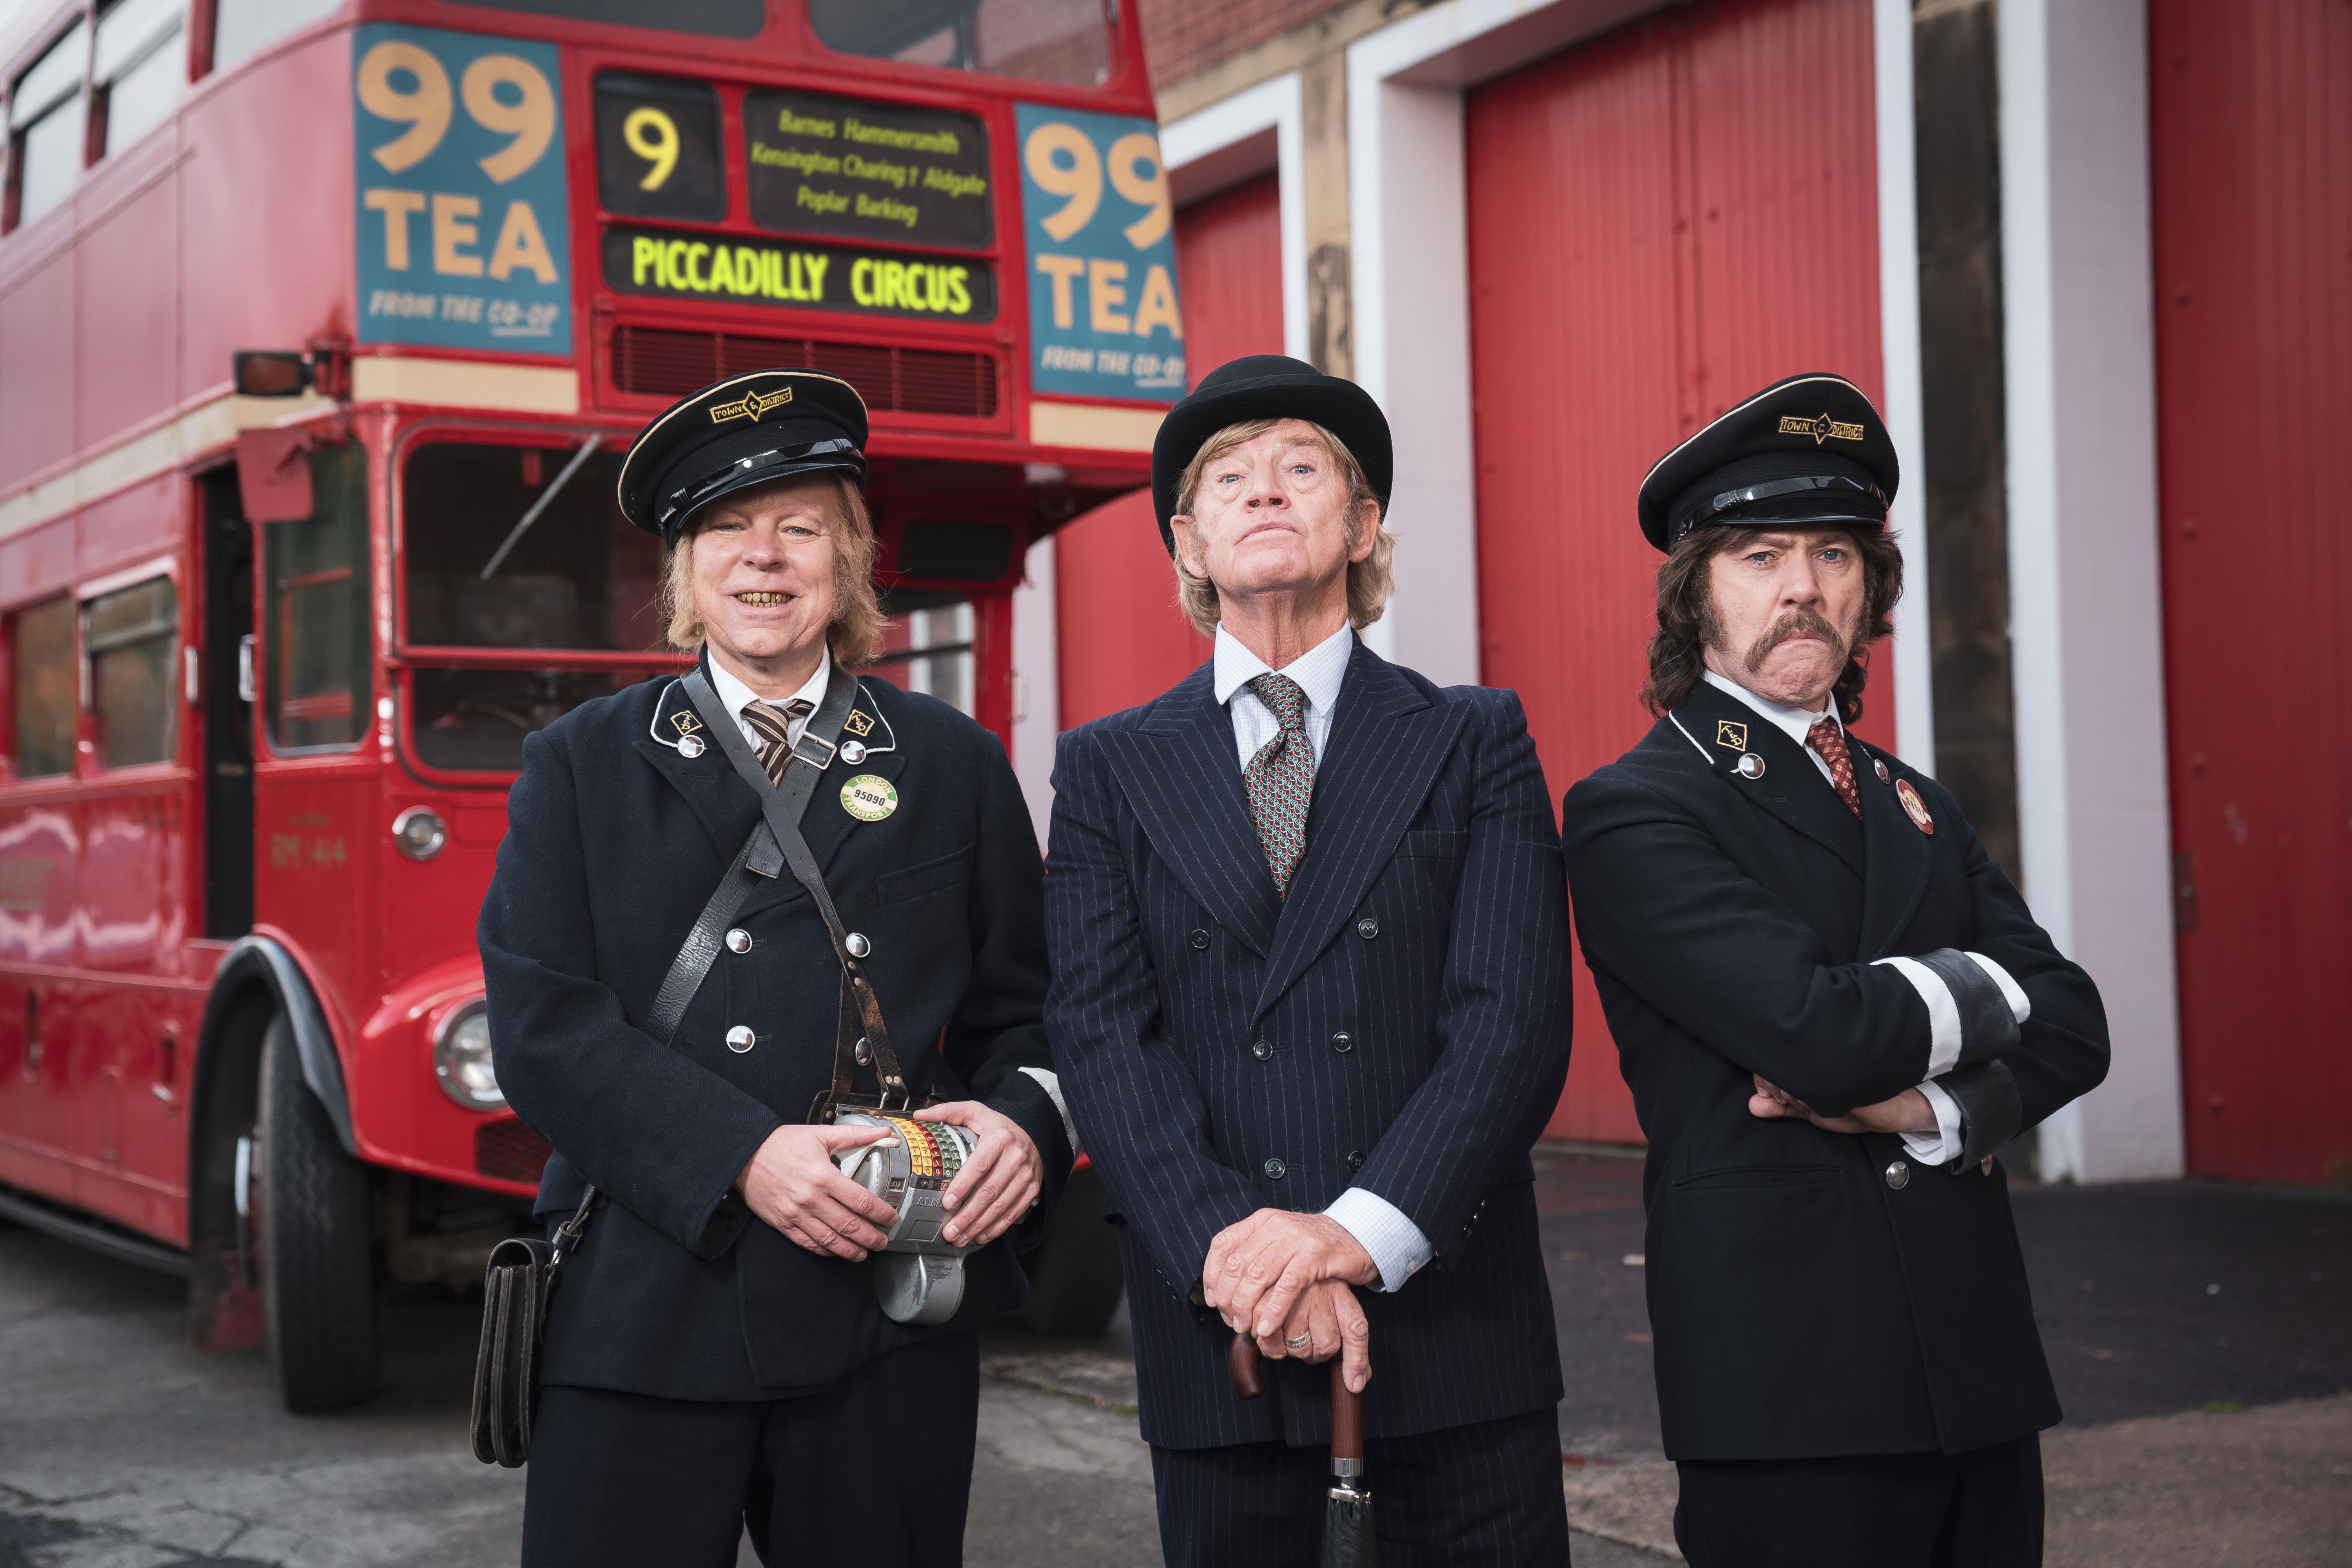 Star-studded cast joins Reece Shearsmith and Steve Pemberton for Inside No. 9 series eight. (BBC)